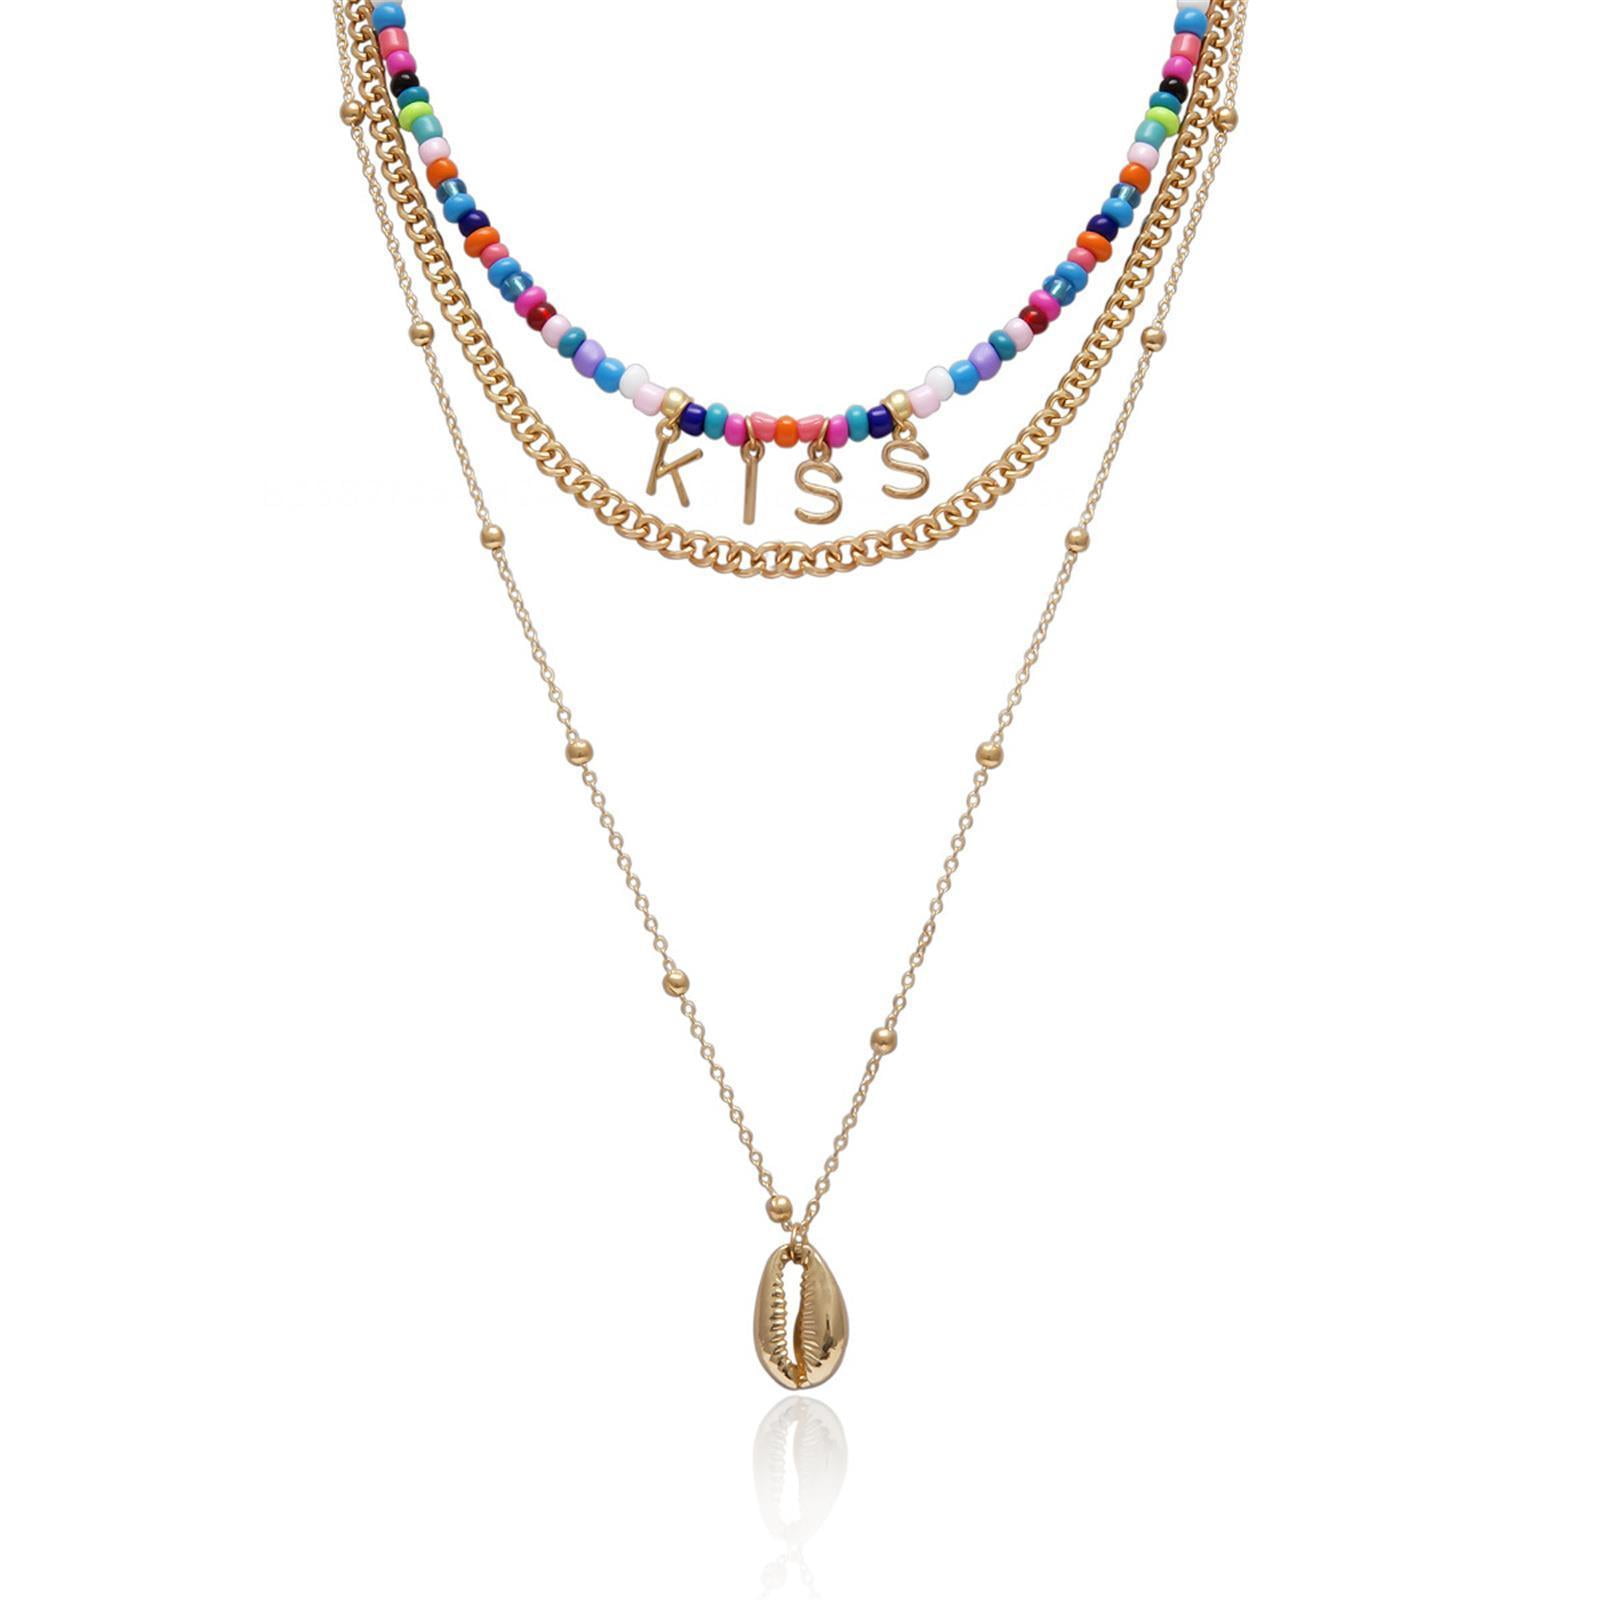 Buy Multilayer chain necklace with lock attached stylish fashion